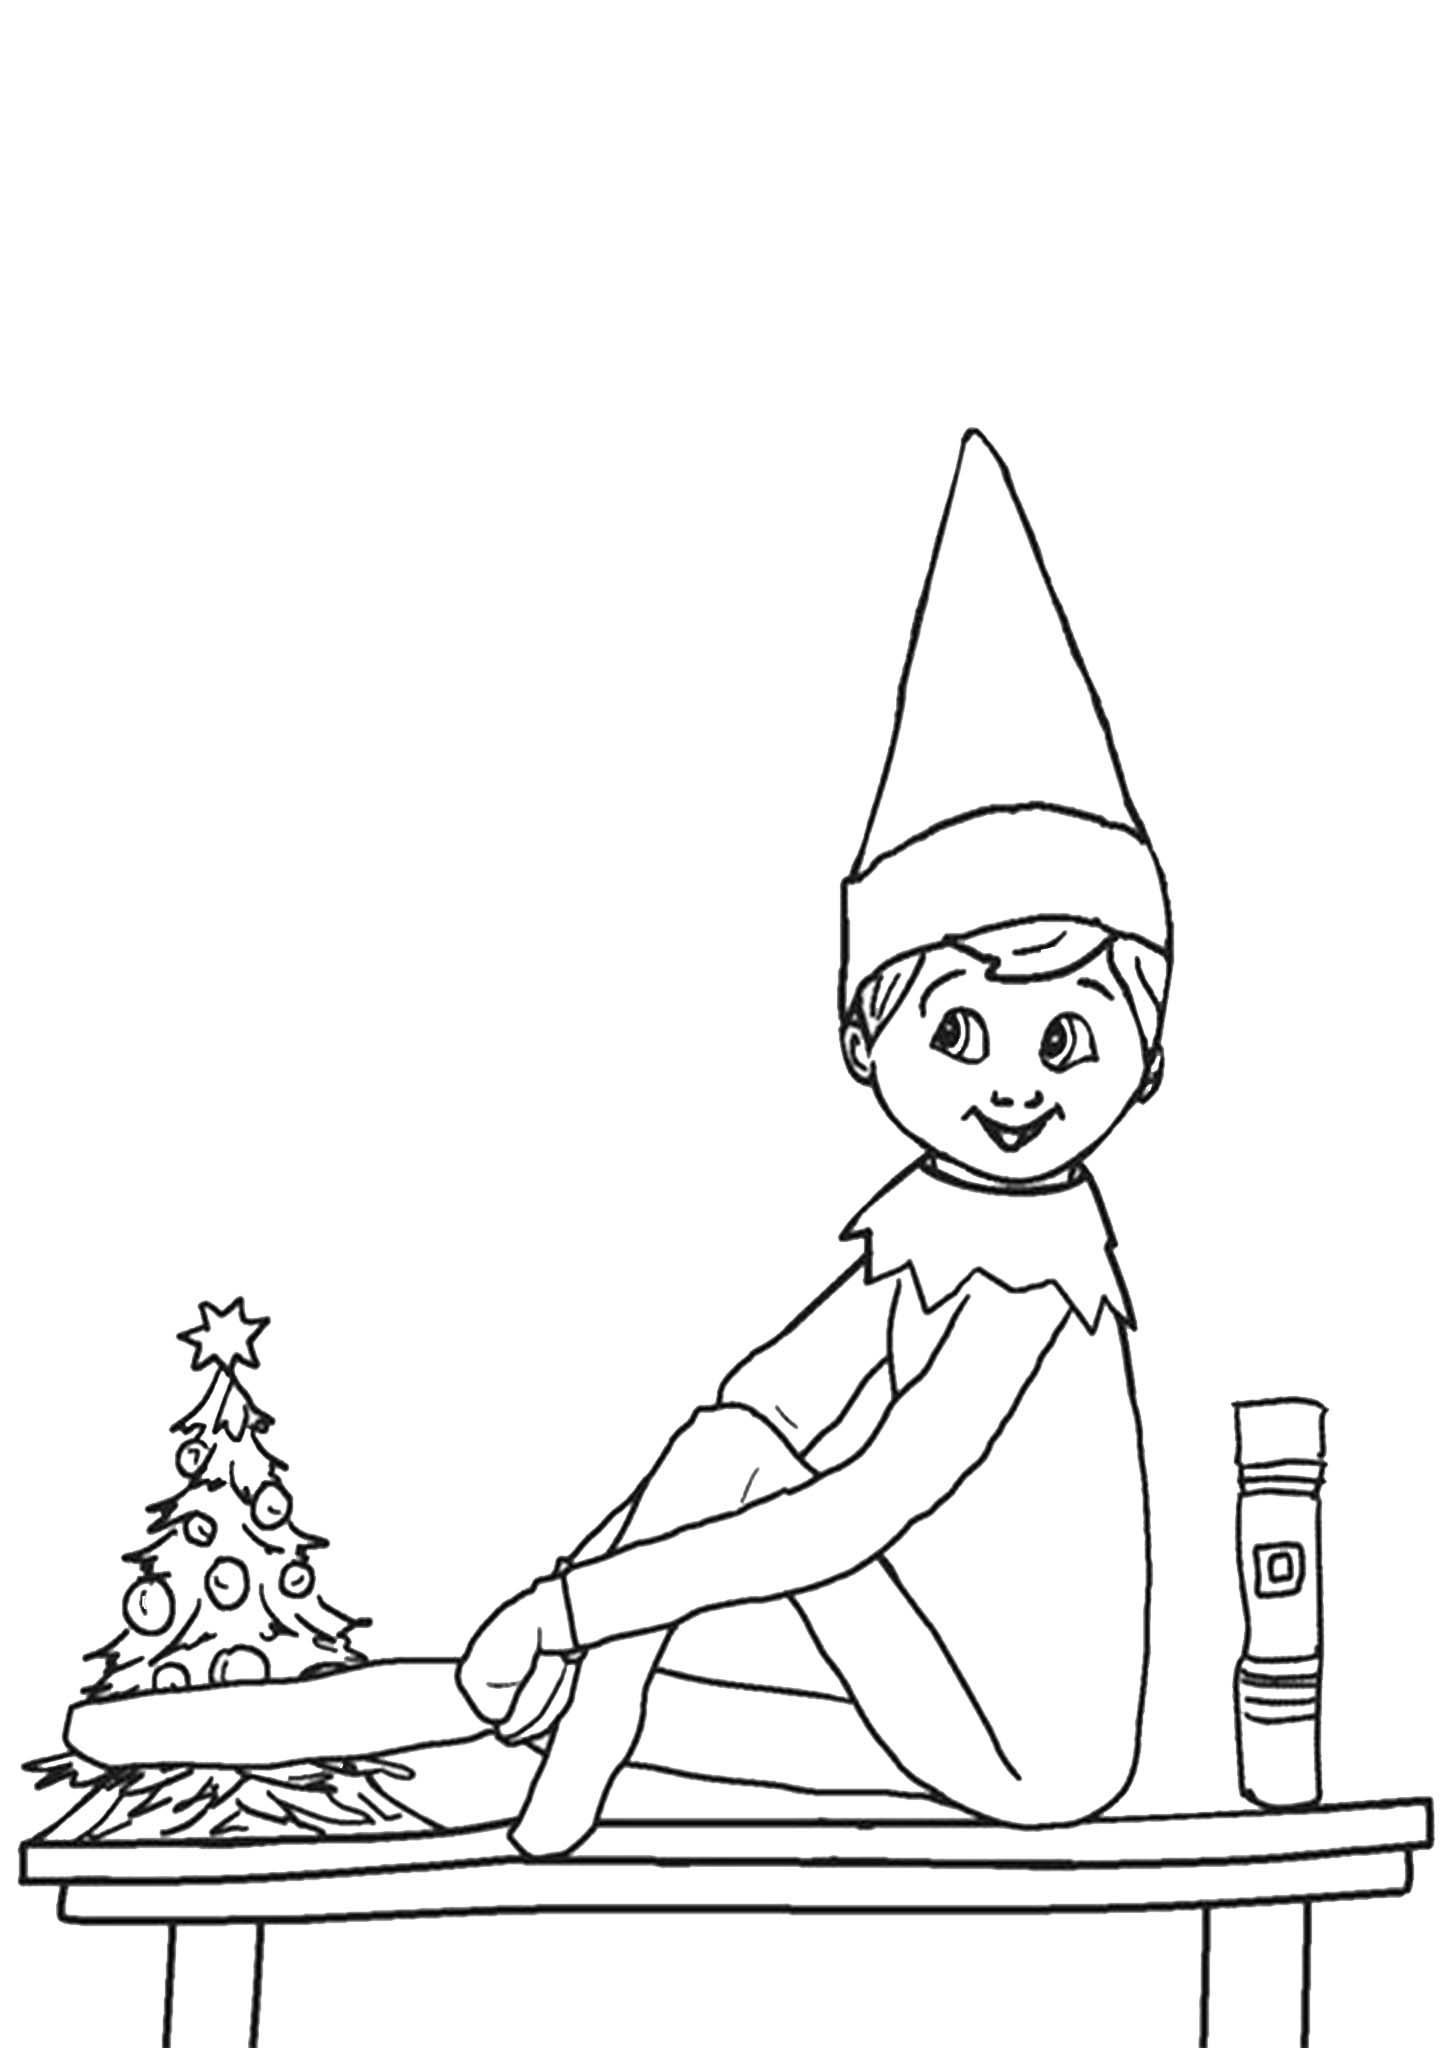 Free printable elf on the shelf coloring pages christmas coloring pages christmas coloring sheets elf drawings